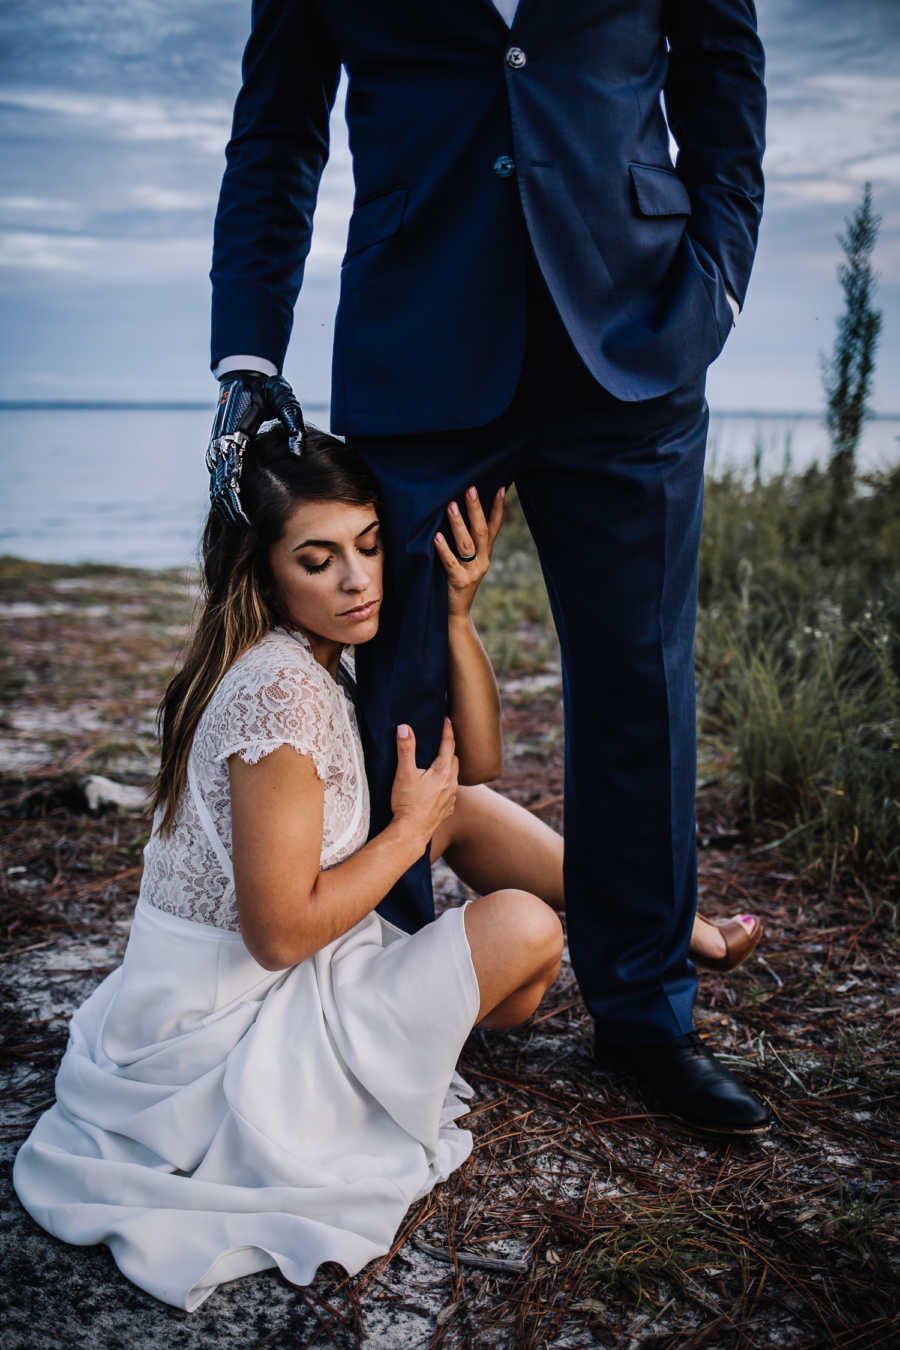 Bride sits on ground with limbs wrapped around husbands leg who also has bionic hand